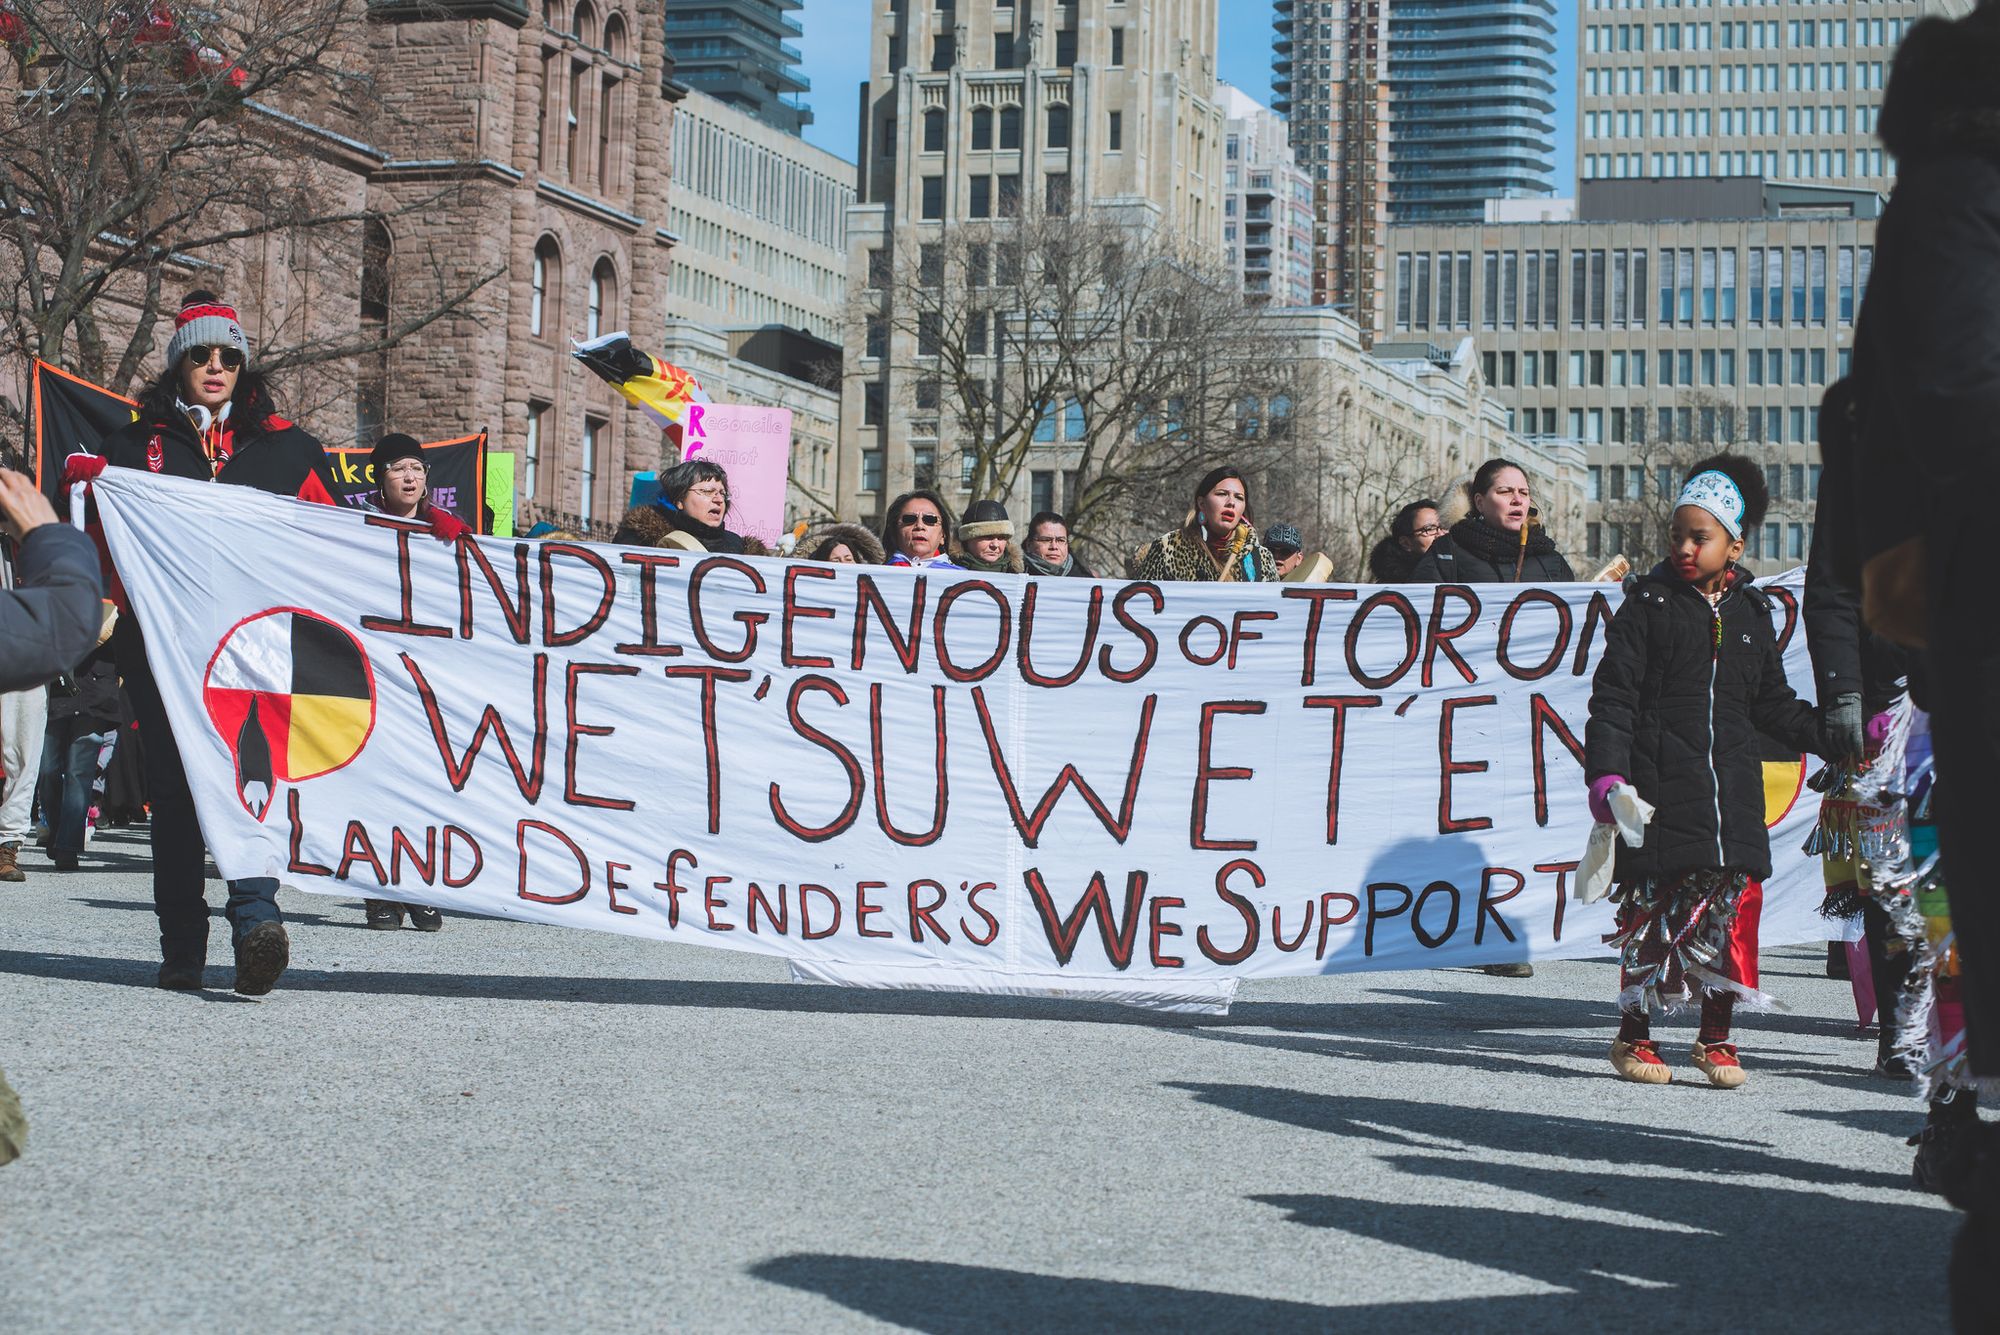 Wet'suwet'en Solidarity Event - Queen's Park to City Hall, Toronto, Ontario - February 22, 2020 by Jason Hargrove is licensed